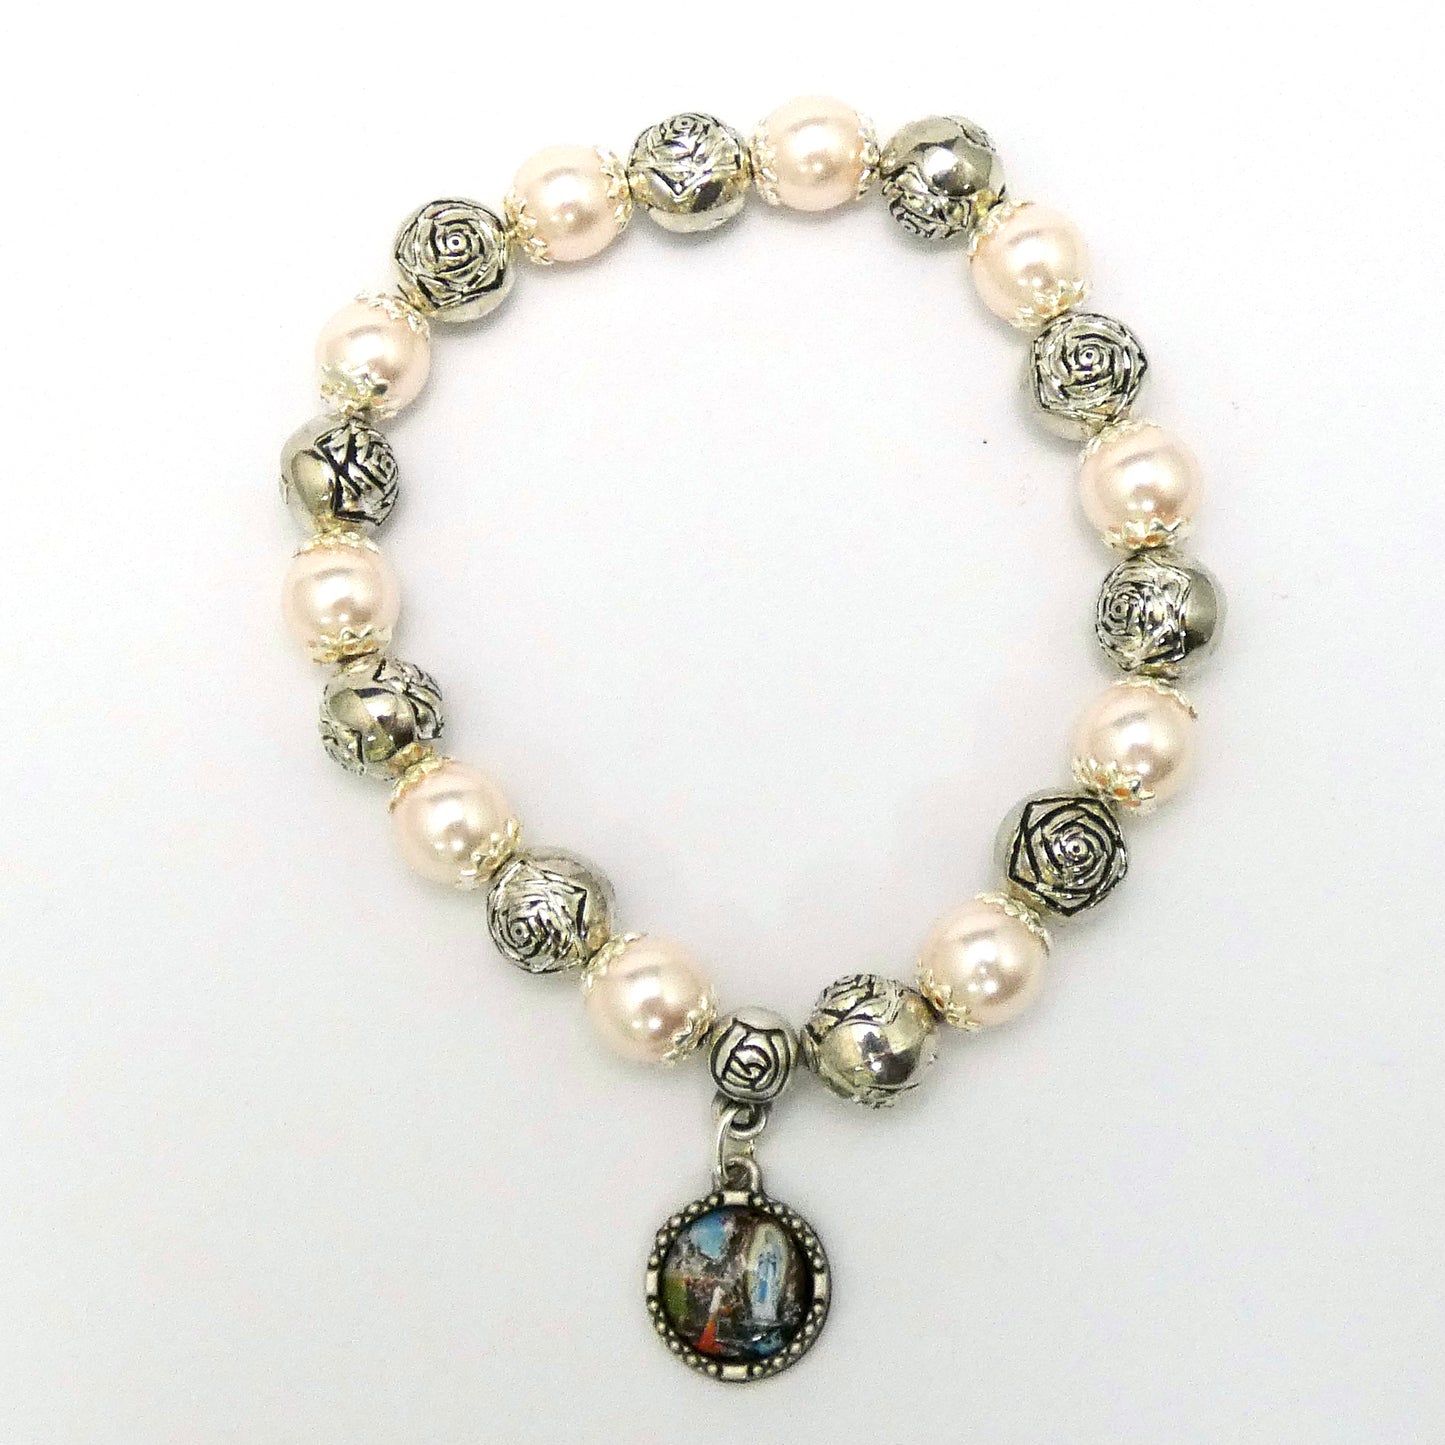 Pearl and Rose Lourdes Decade Rosary Bracelet of Assorted Colors